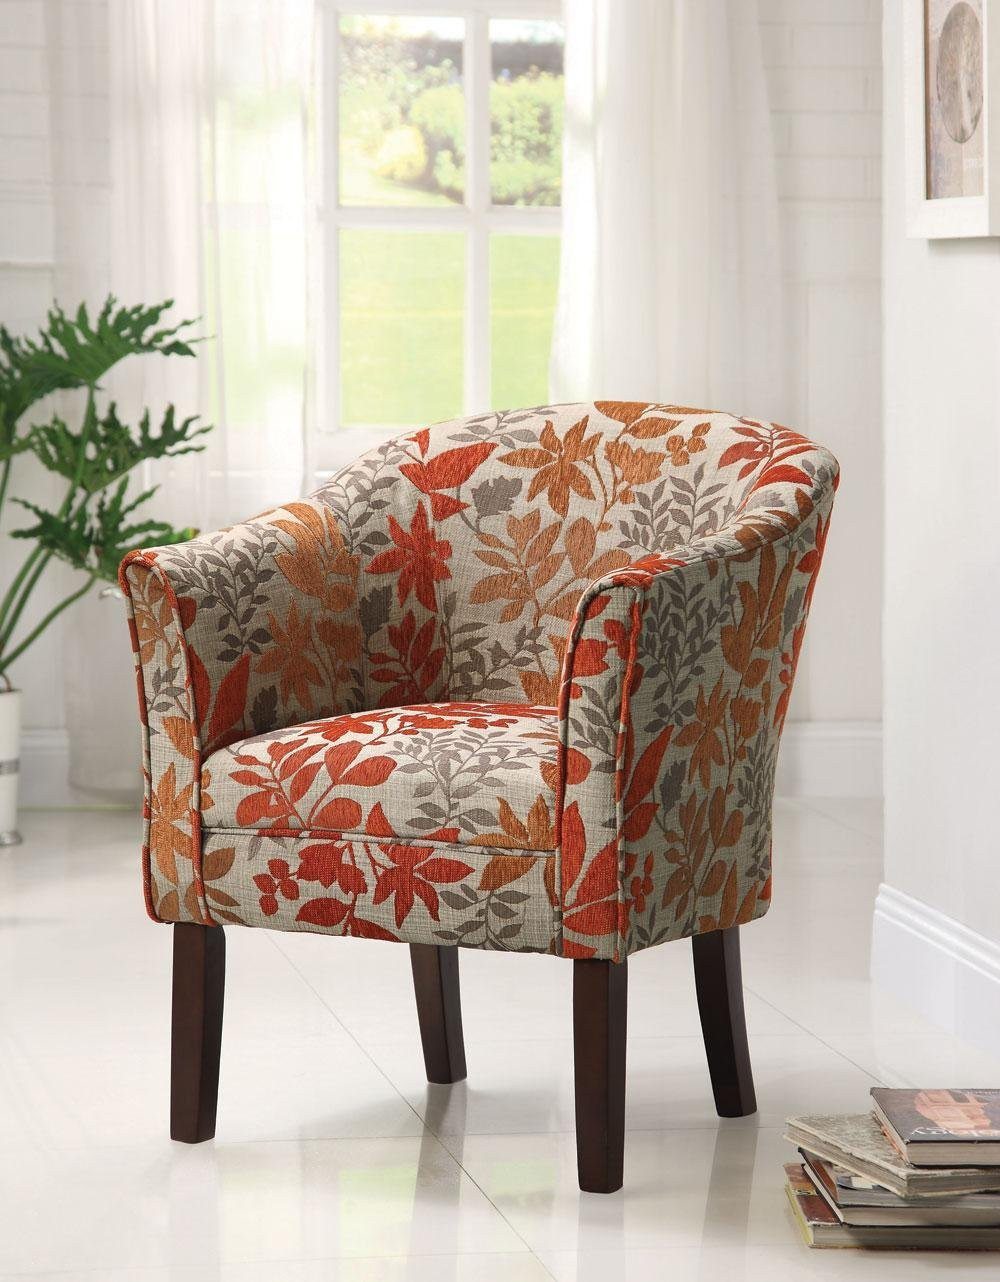 Accent Chairs Living Room
 Accent chairs for living room 23 reasons to